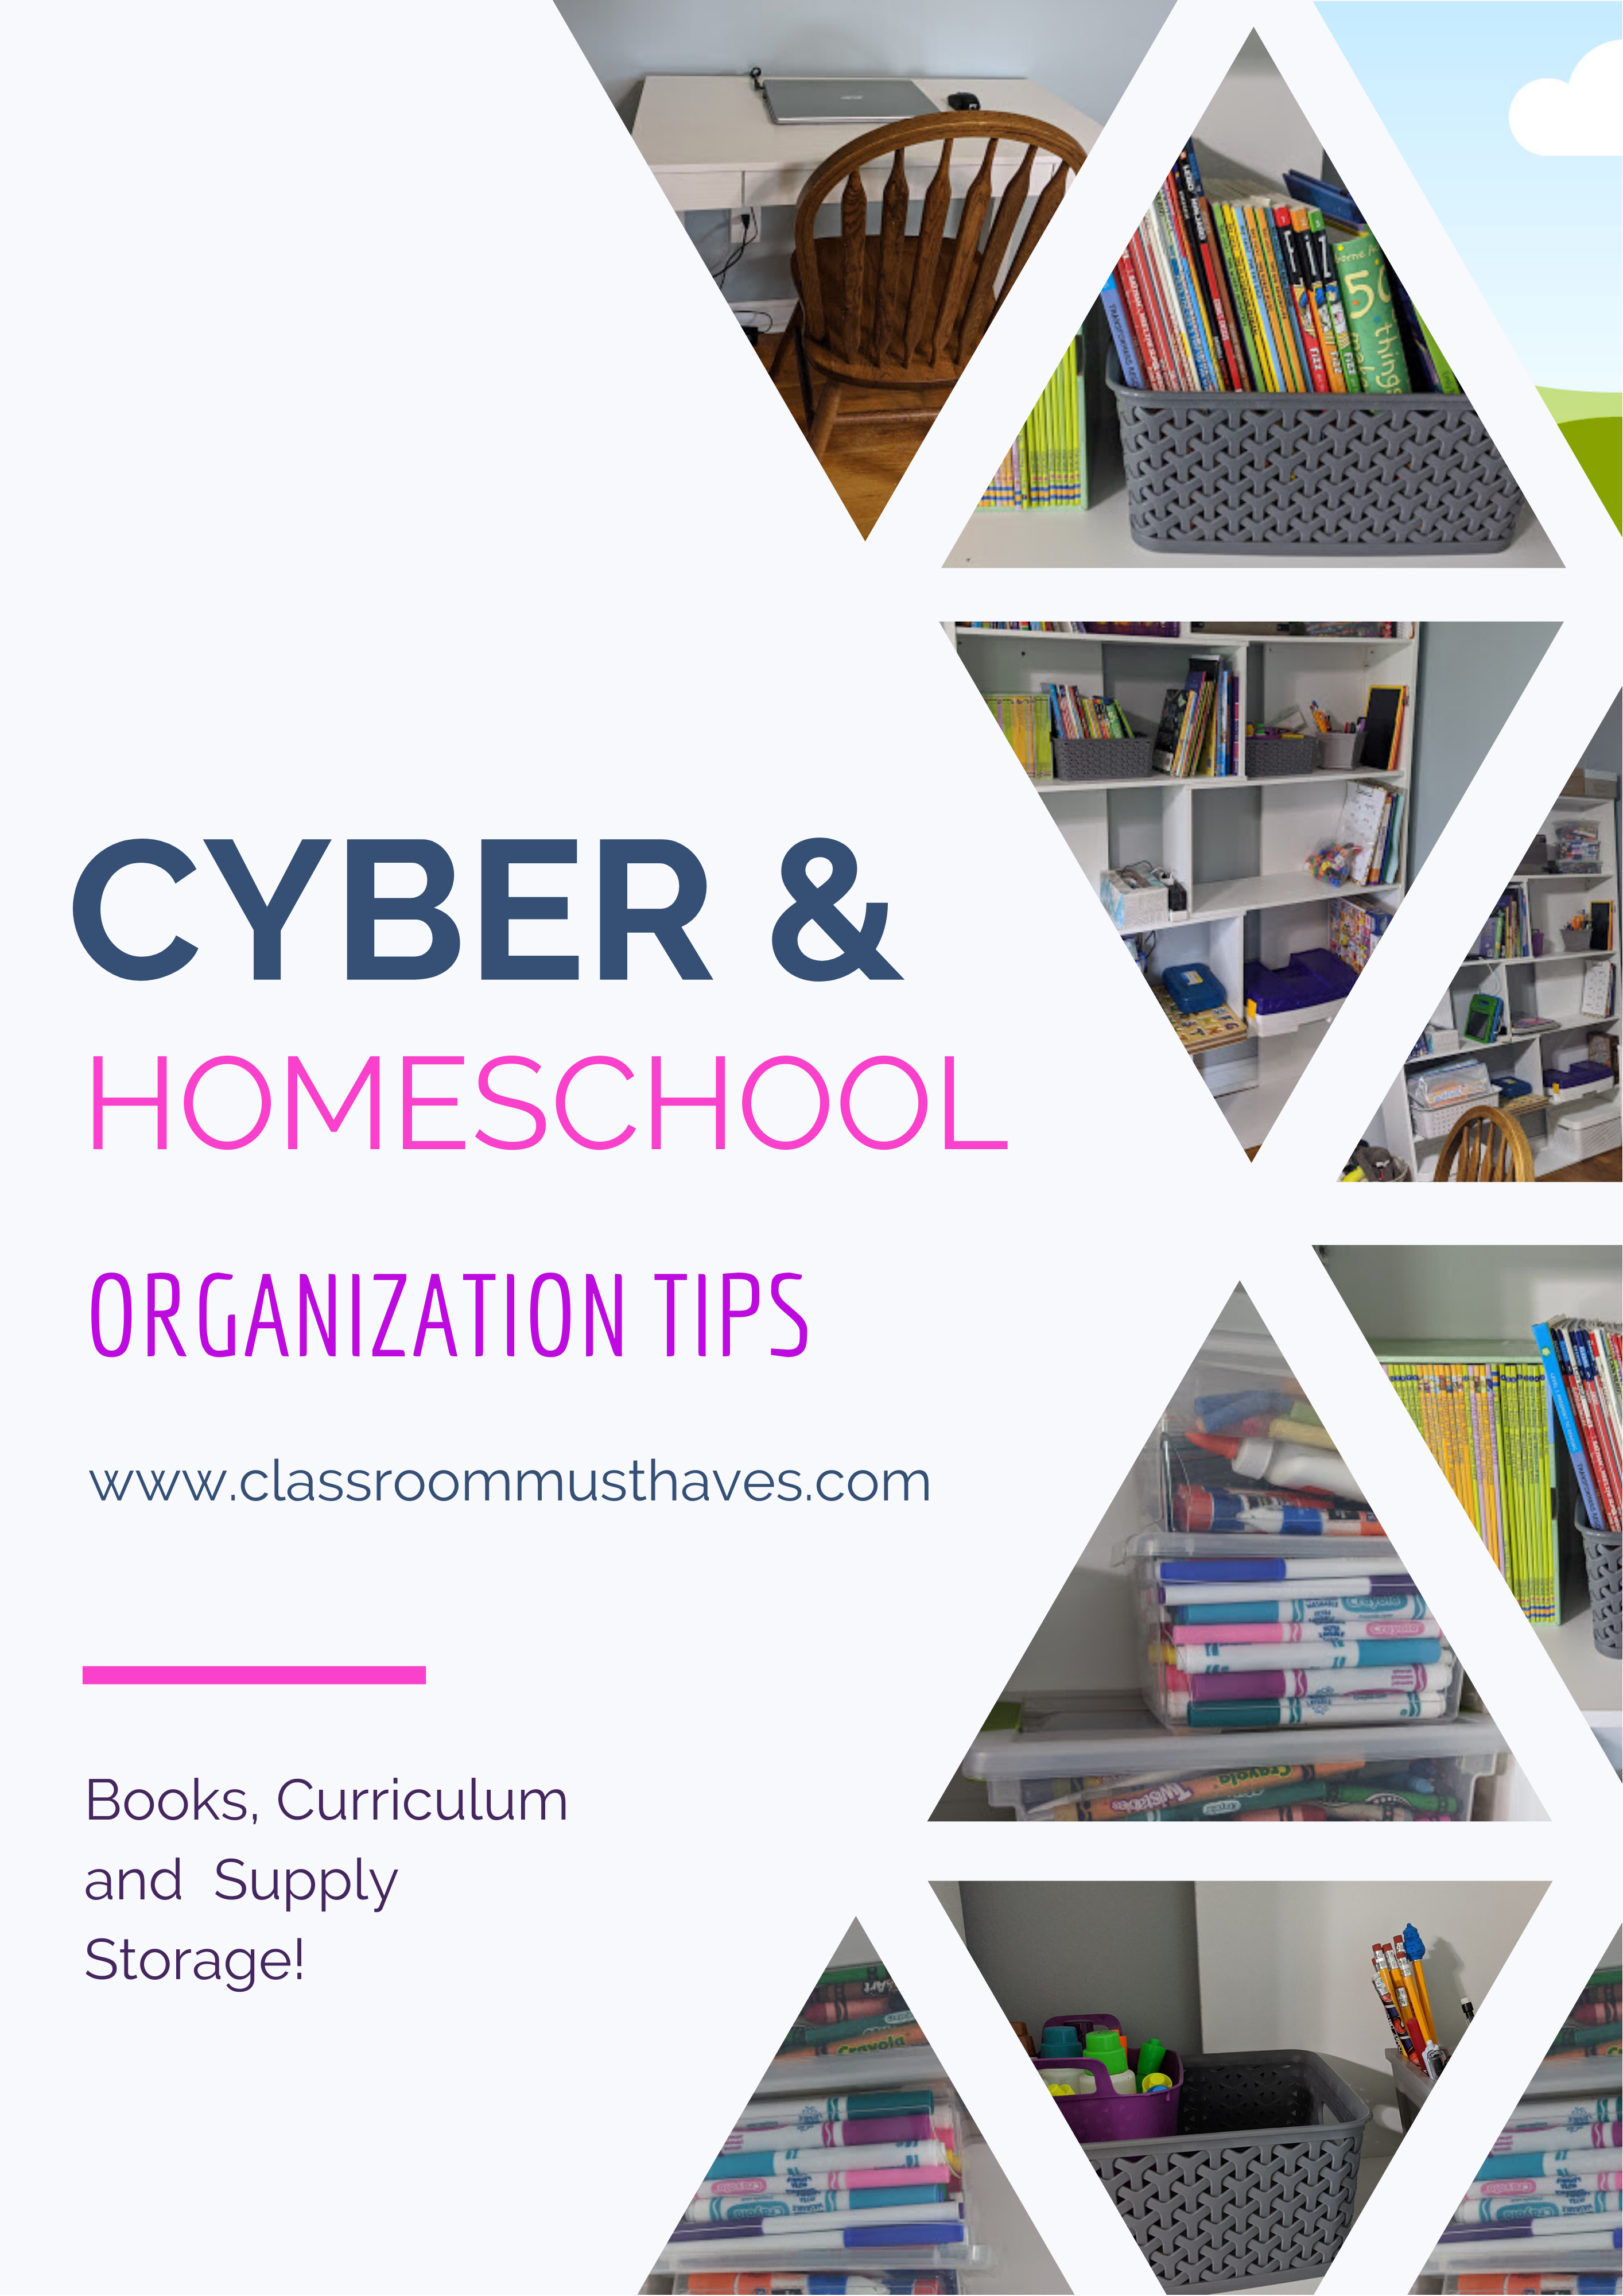 Organization tops to help you and your child navigate the world of cyber and homeschooling! www.classroommusthaves.com via @classroommusthaves